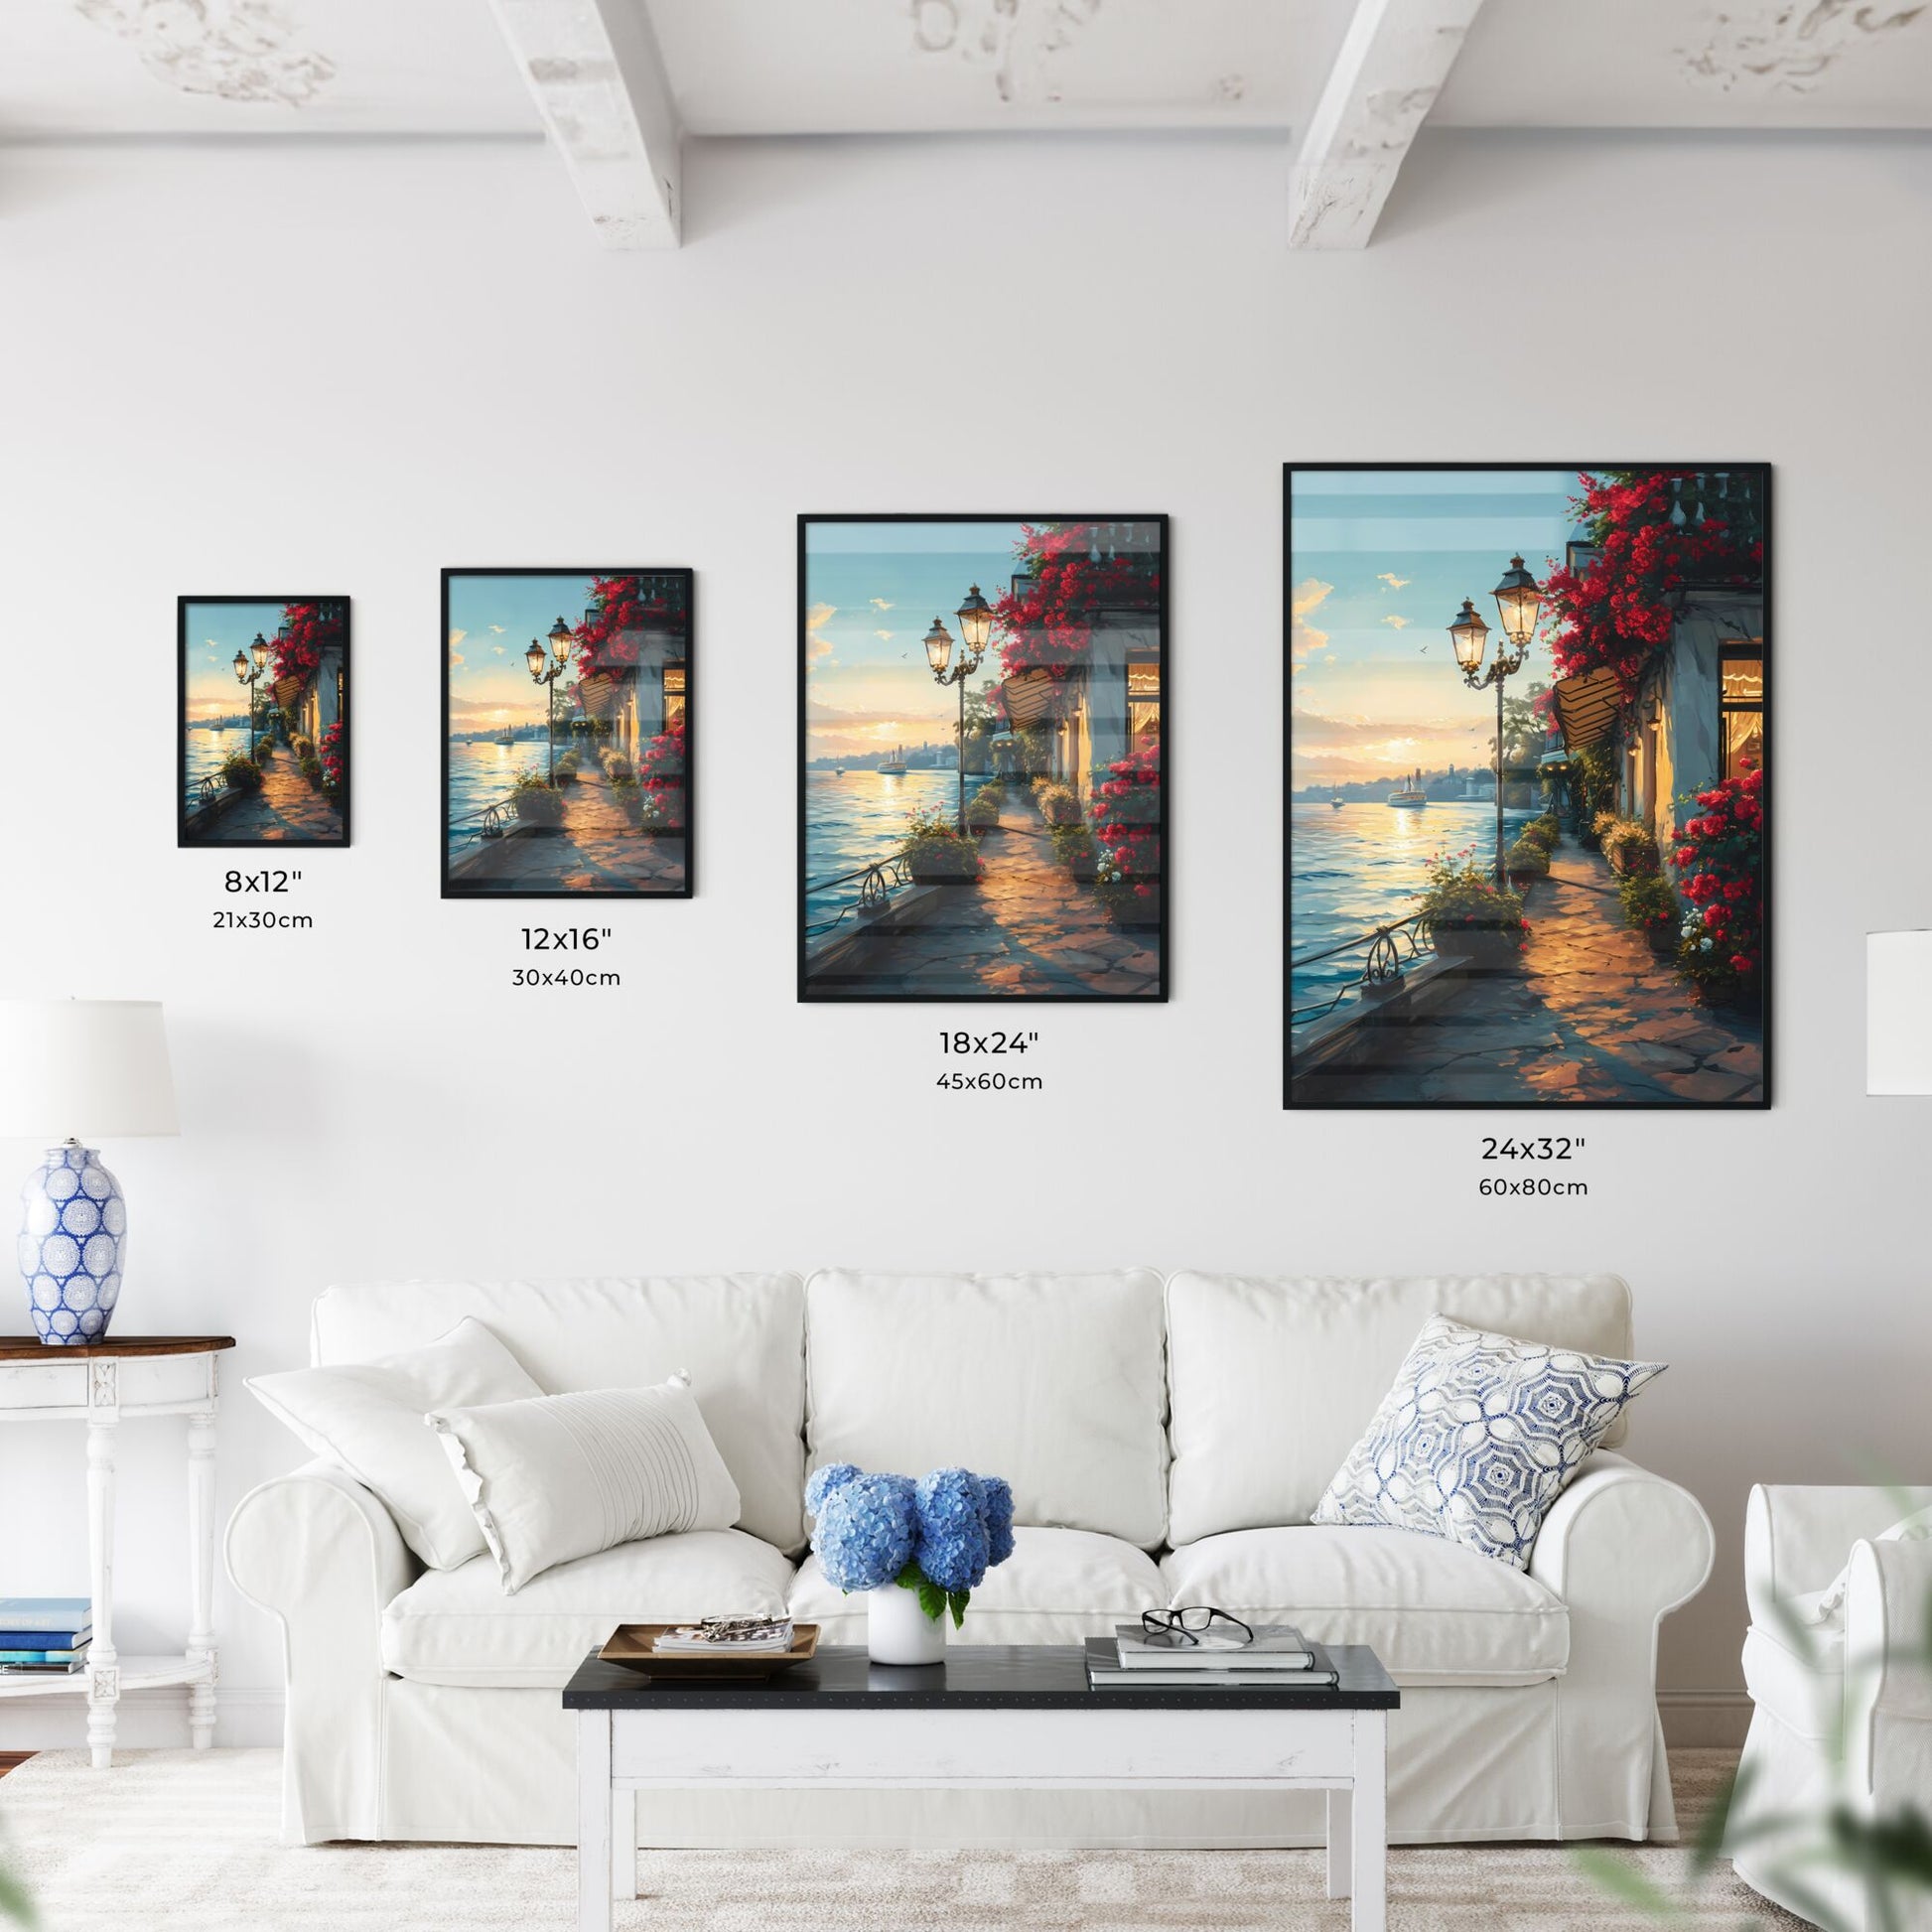 A Poster of Cafe warm lamp lakeside - A Street With Flowers And A Body Of Water Default Title